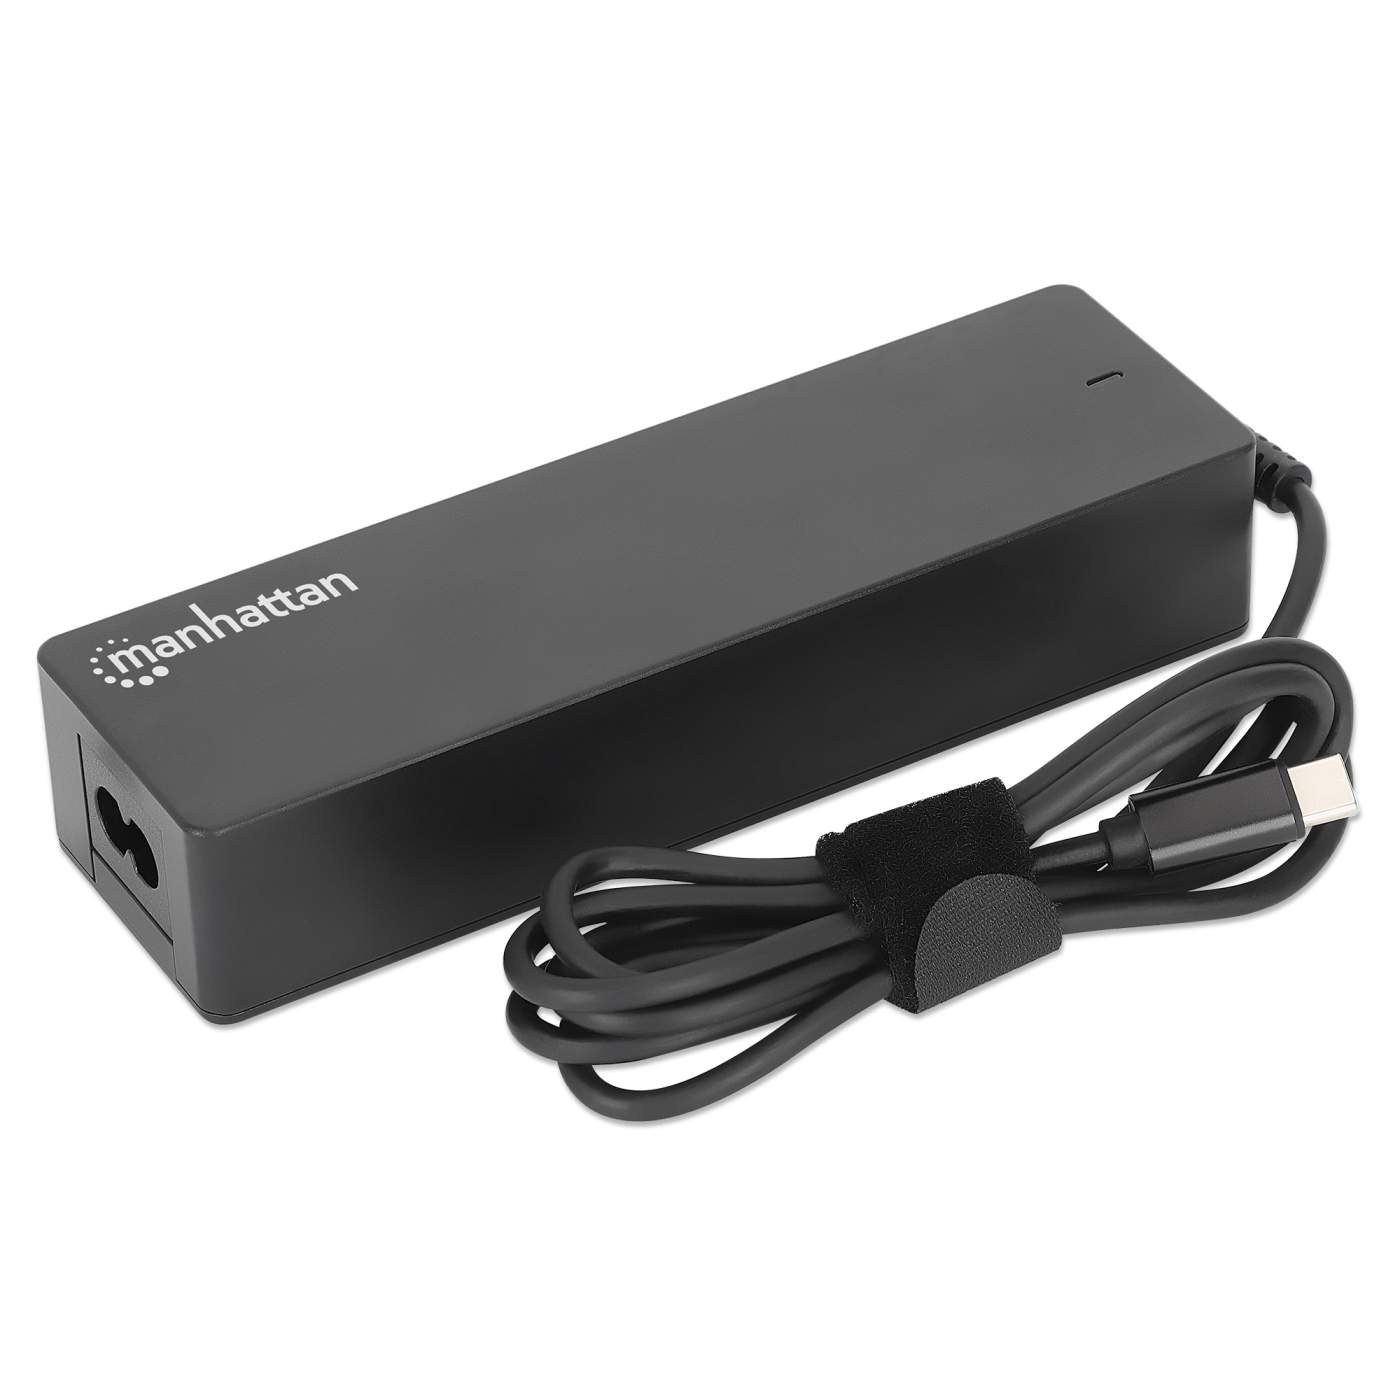 USB-C Power Delivery Laptop Charger - 100 W Image 3